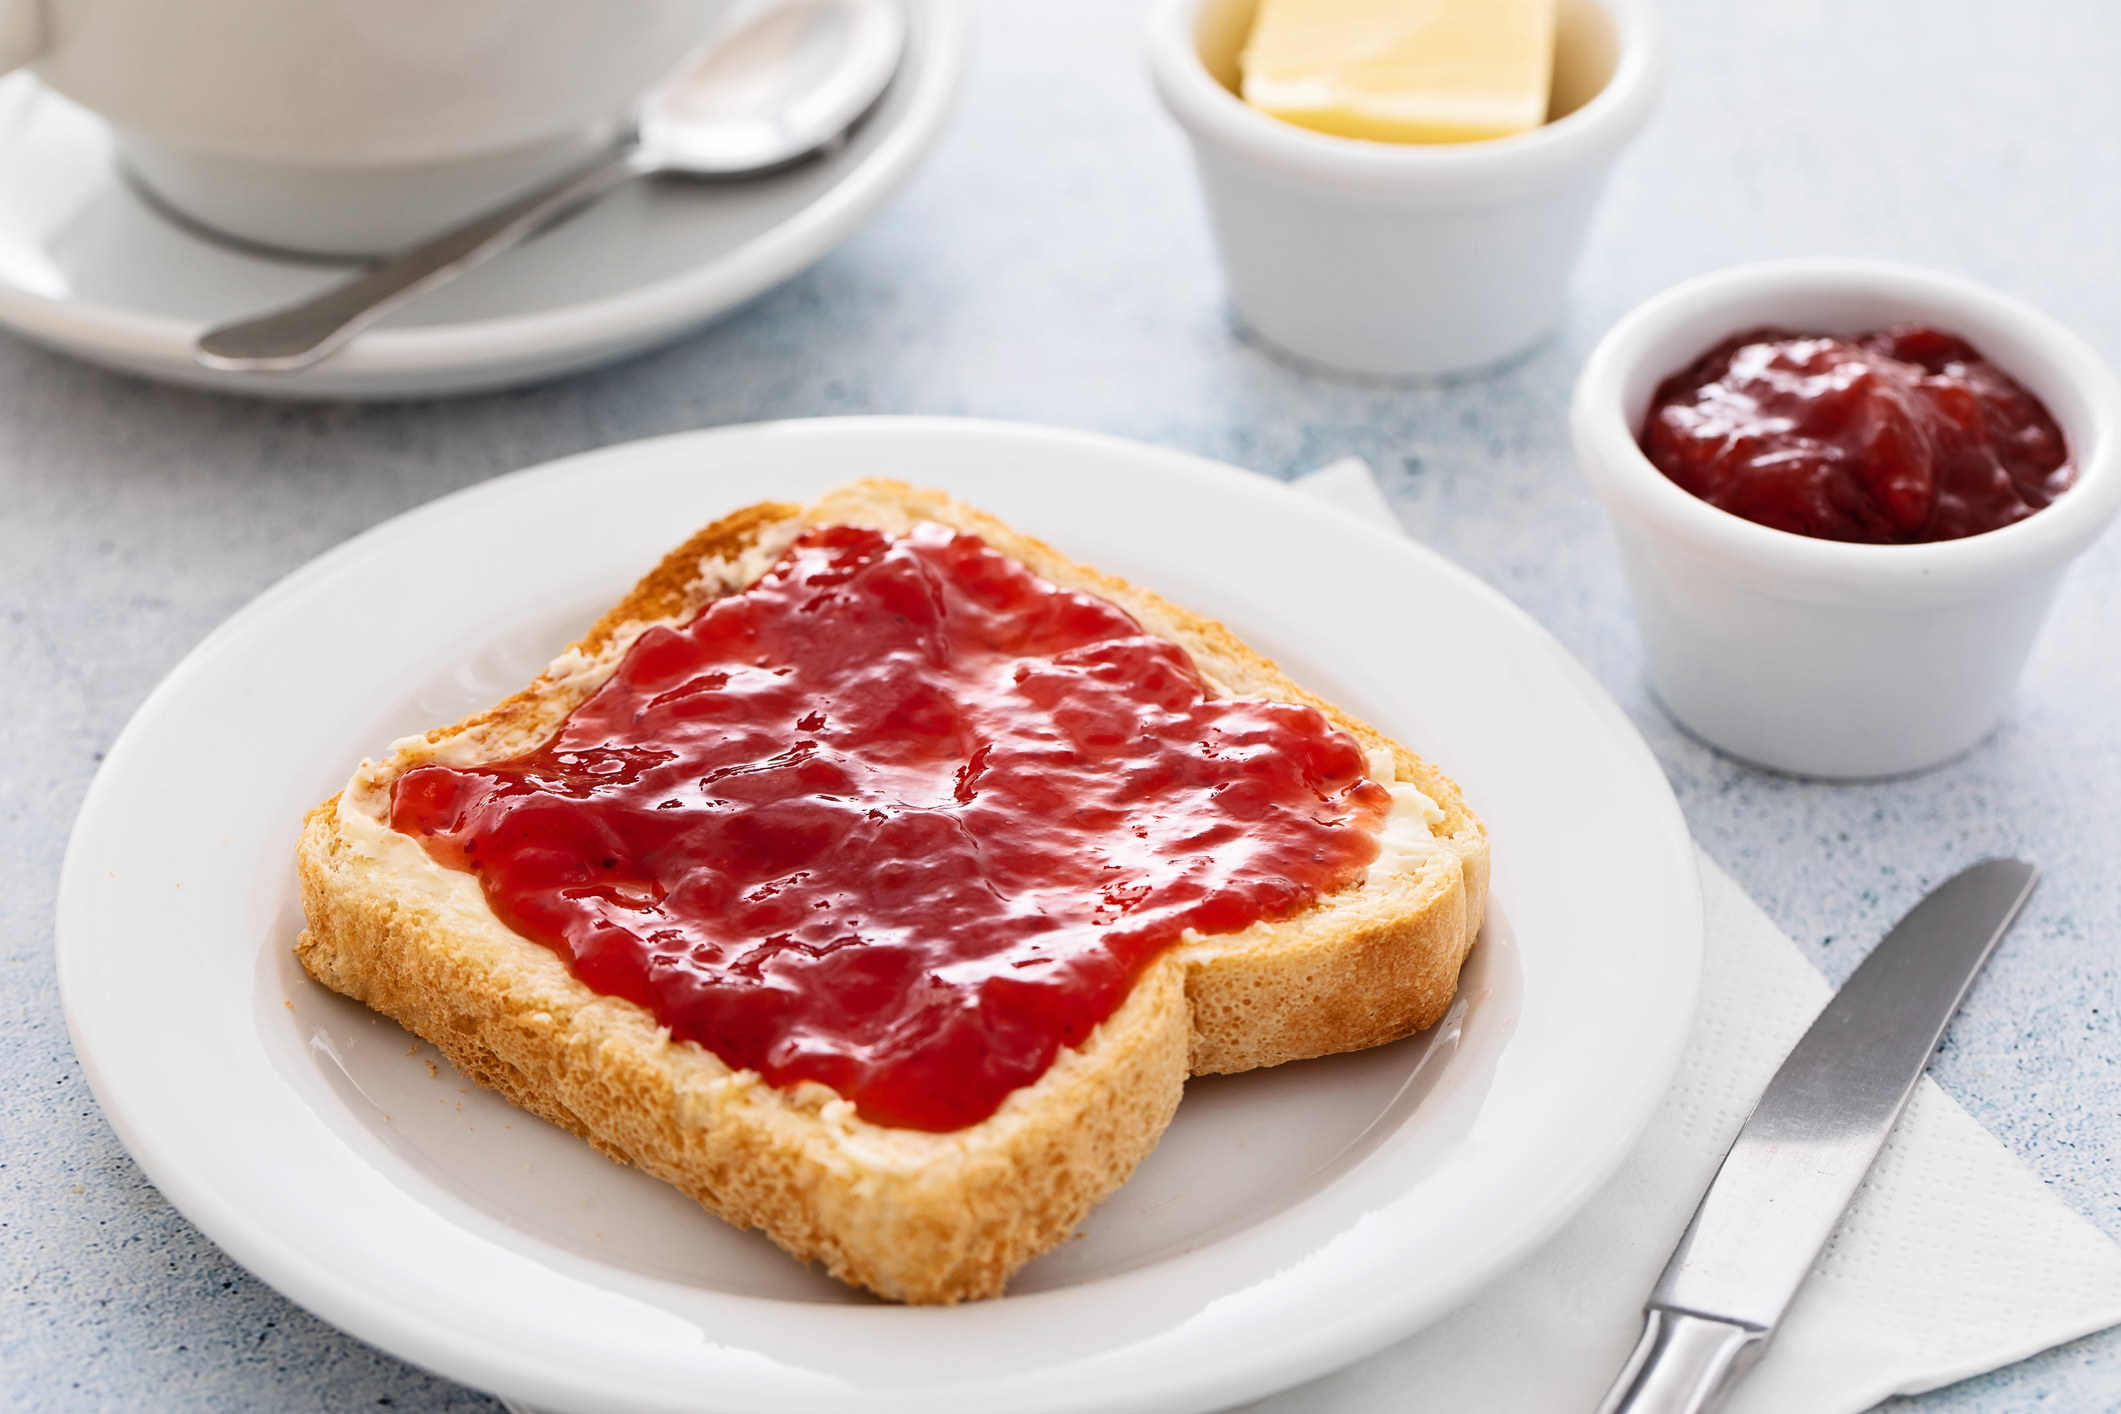 jam and butter on bread